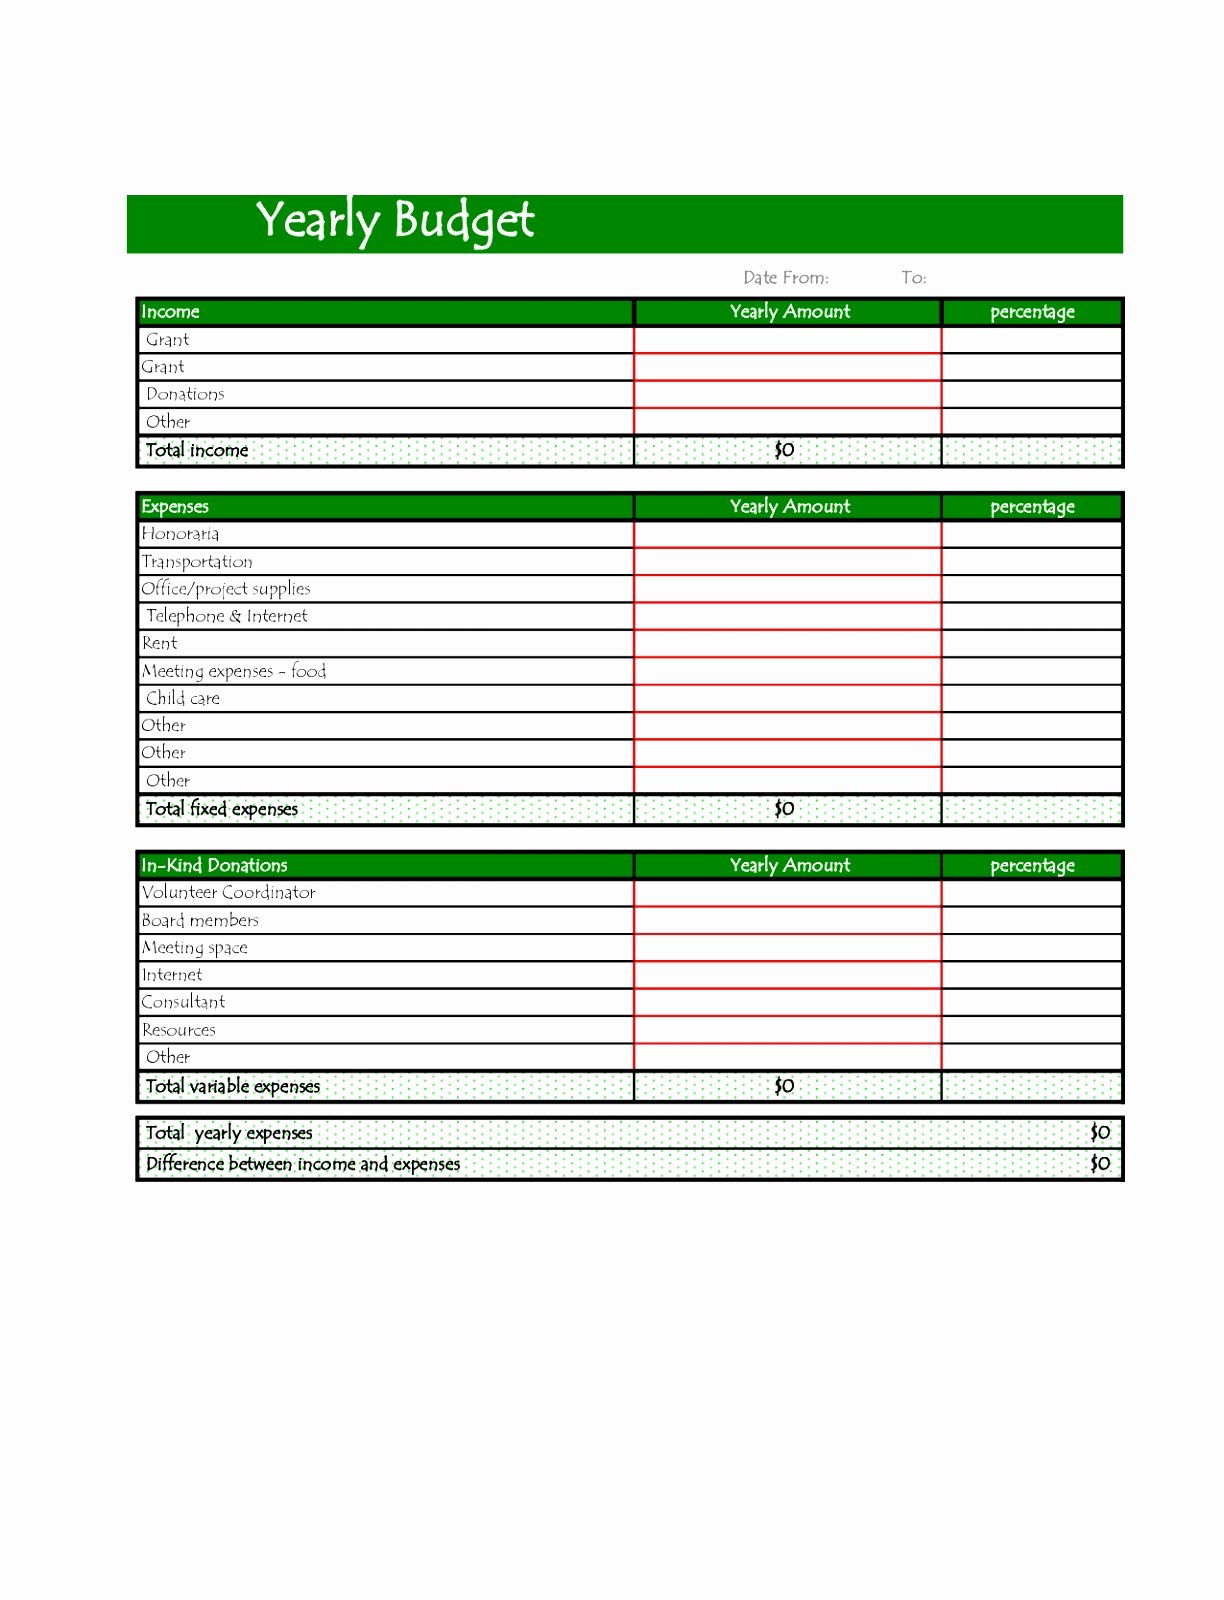 Yearly Budget Template Excel Free Best Of 6 Annual Operating Bud Template Uyira